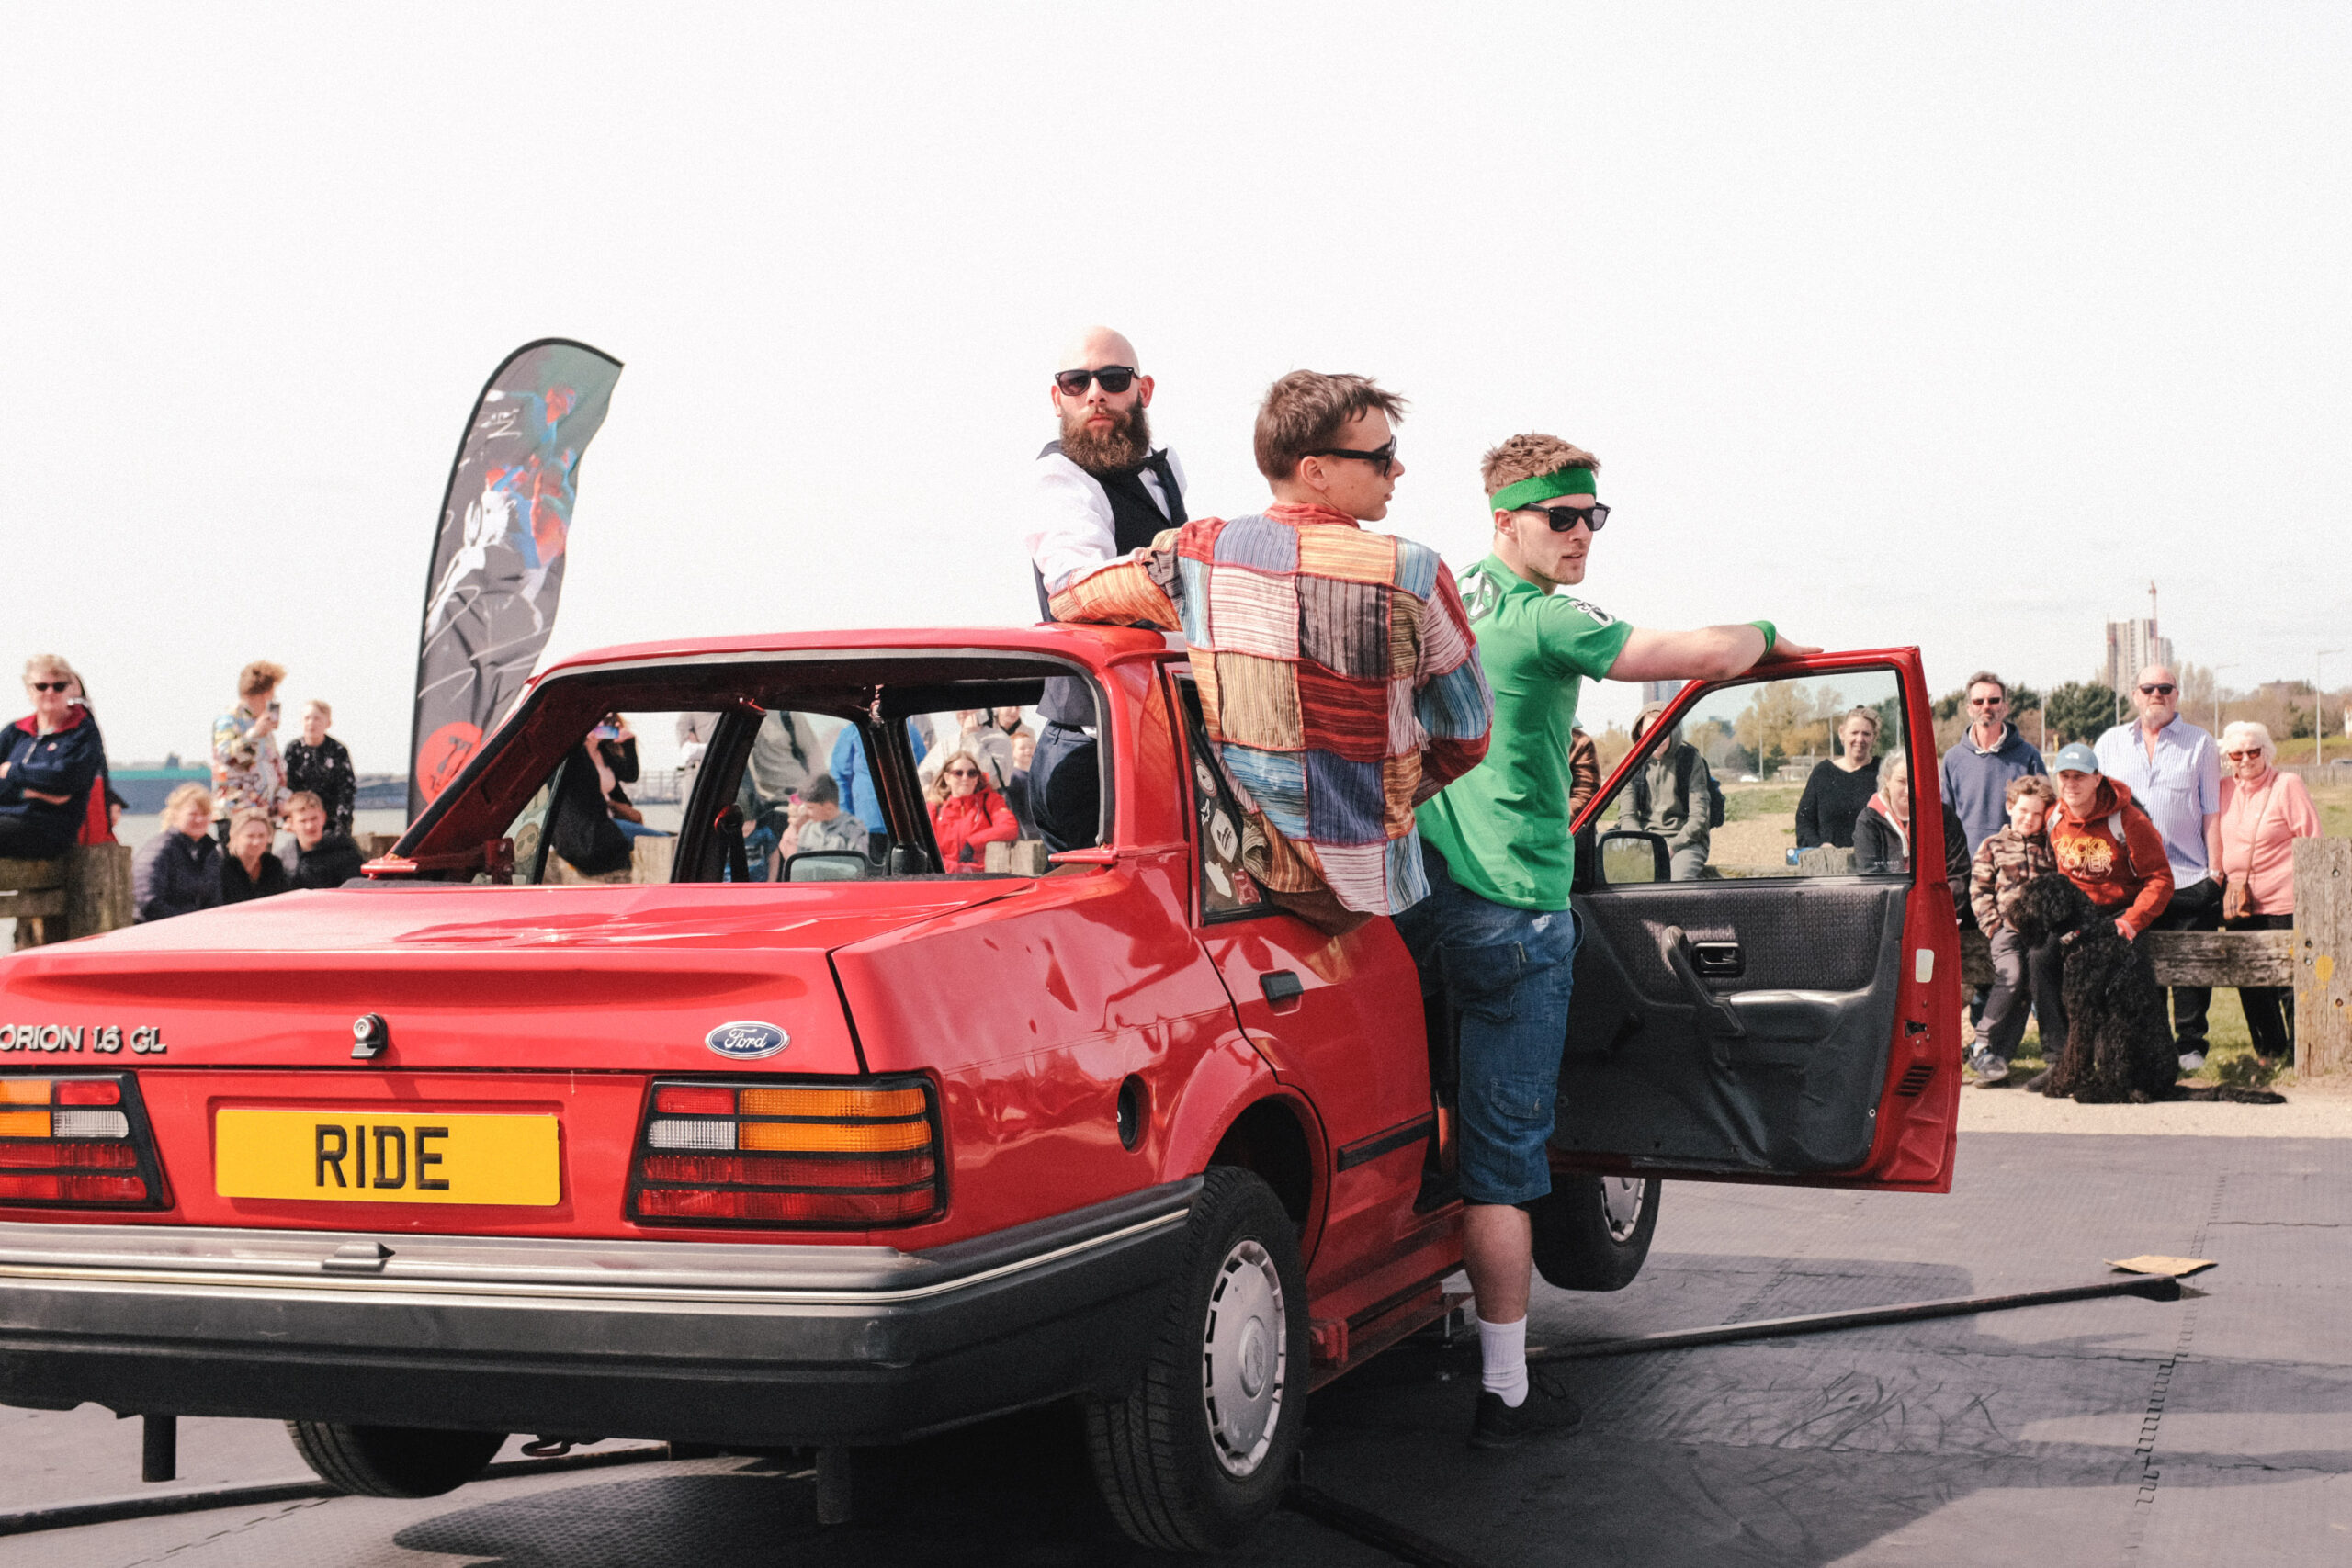 Three dancers perform on an old red Ford Orion car surrounded by an audience. They are leaning out the driver side window and door and are looking cool with some shades on